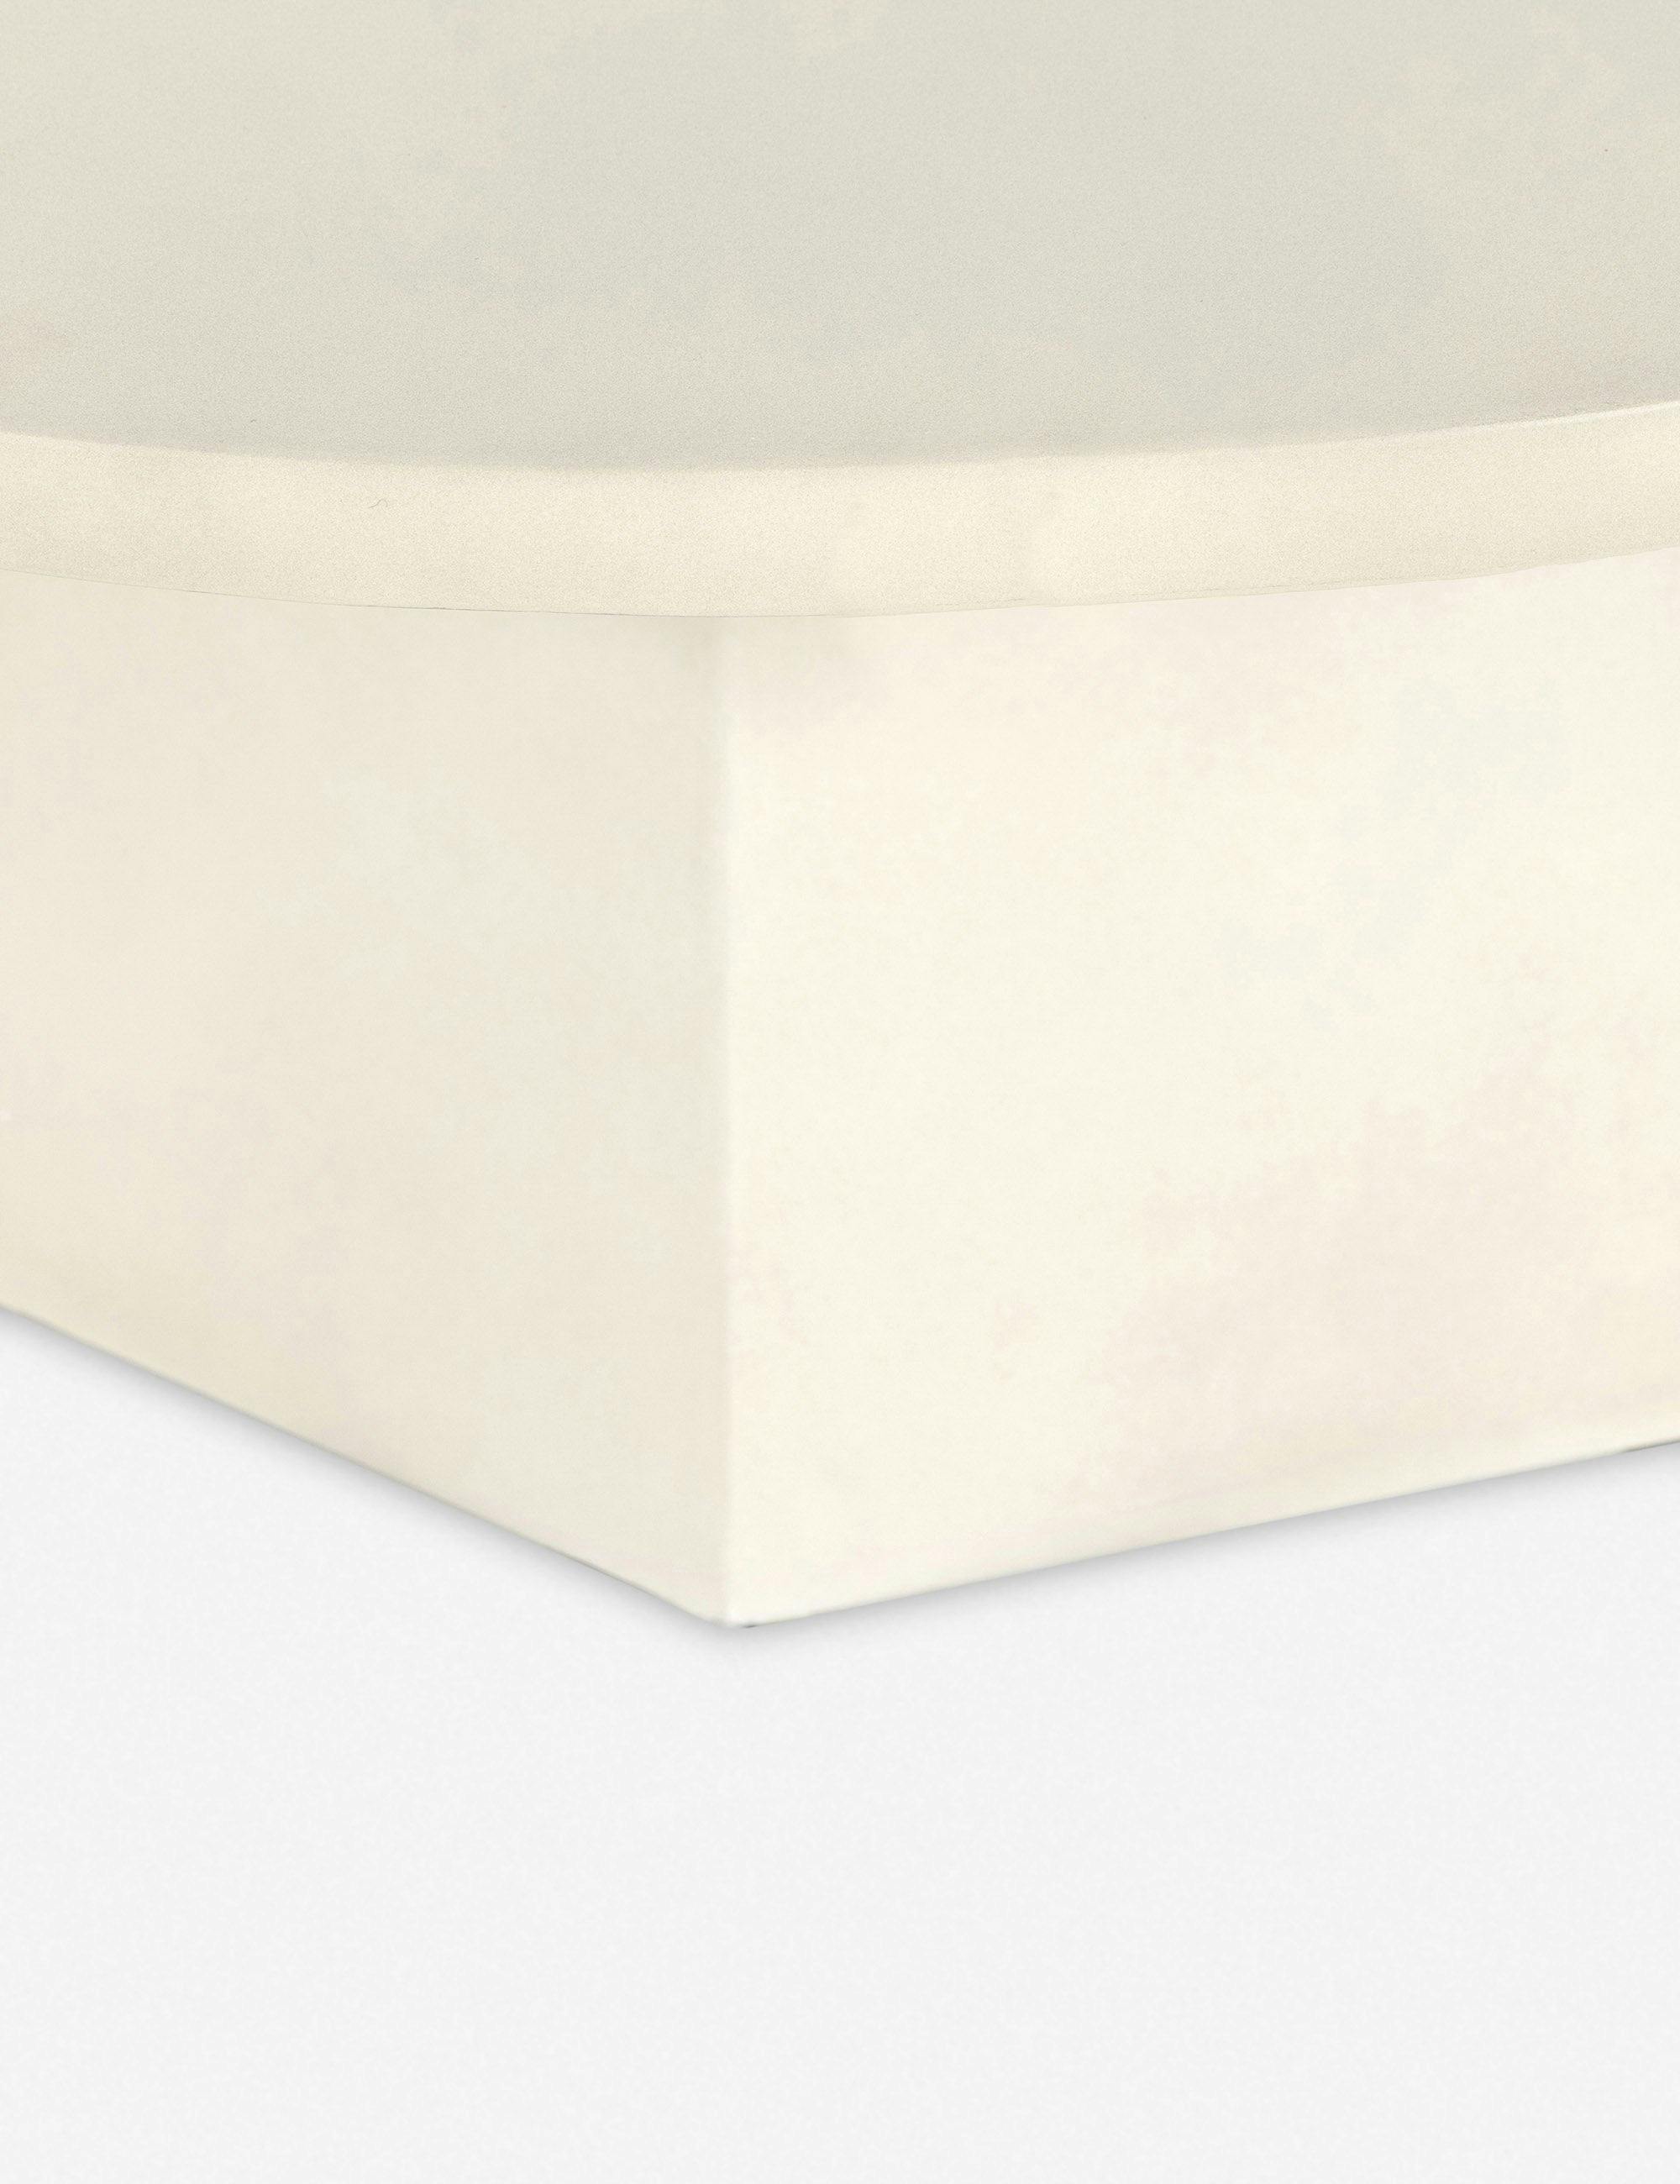 Schuller Round White Concrete Indoor/Outdoor Coffee Table